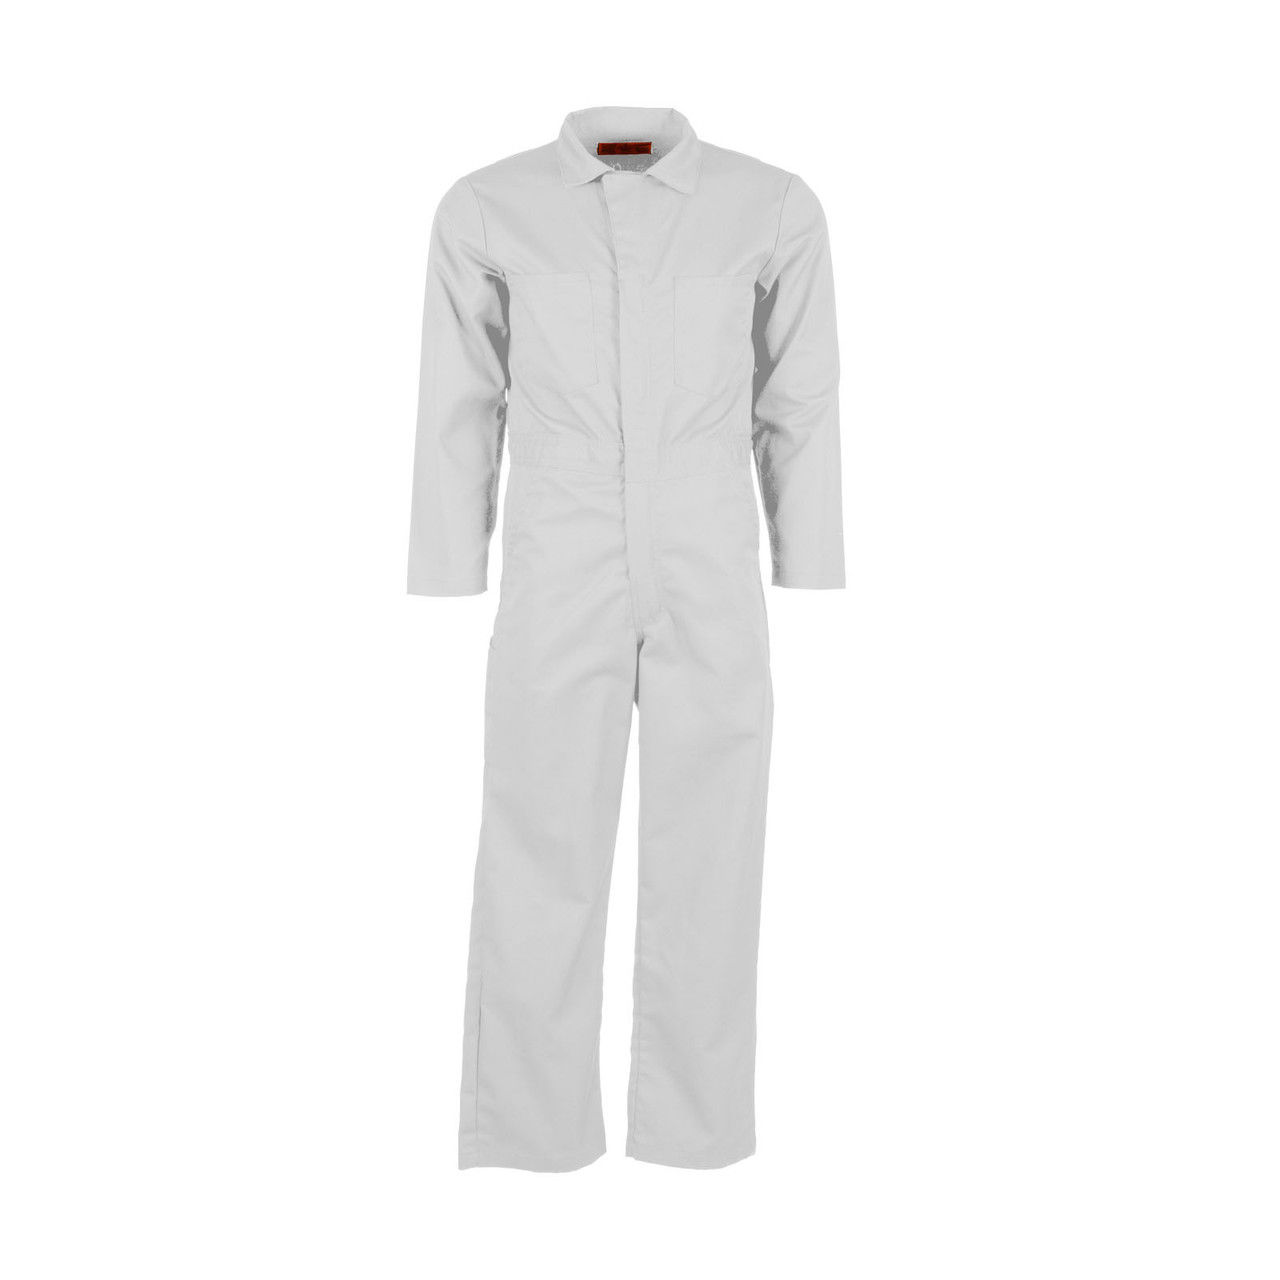 What is the waist size range for these white coveralls?